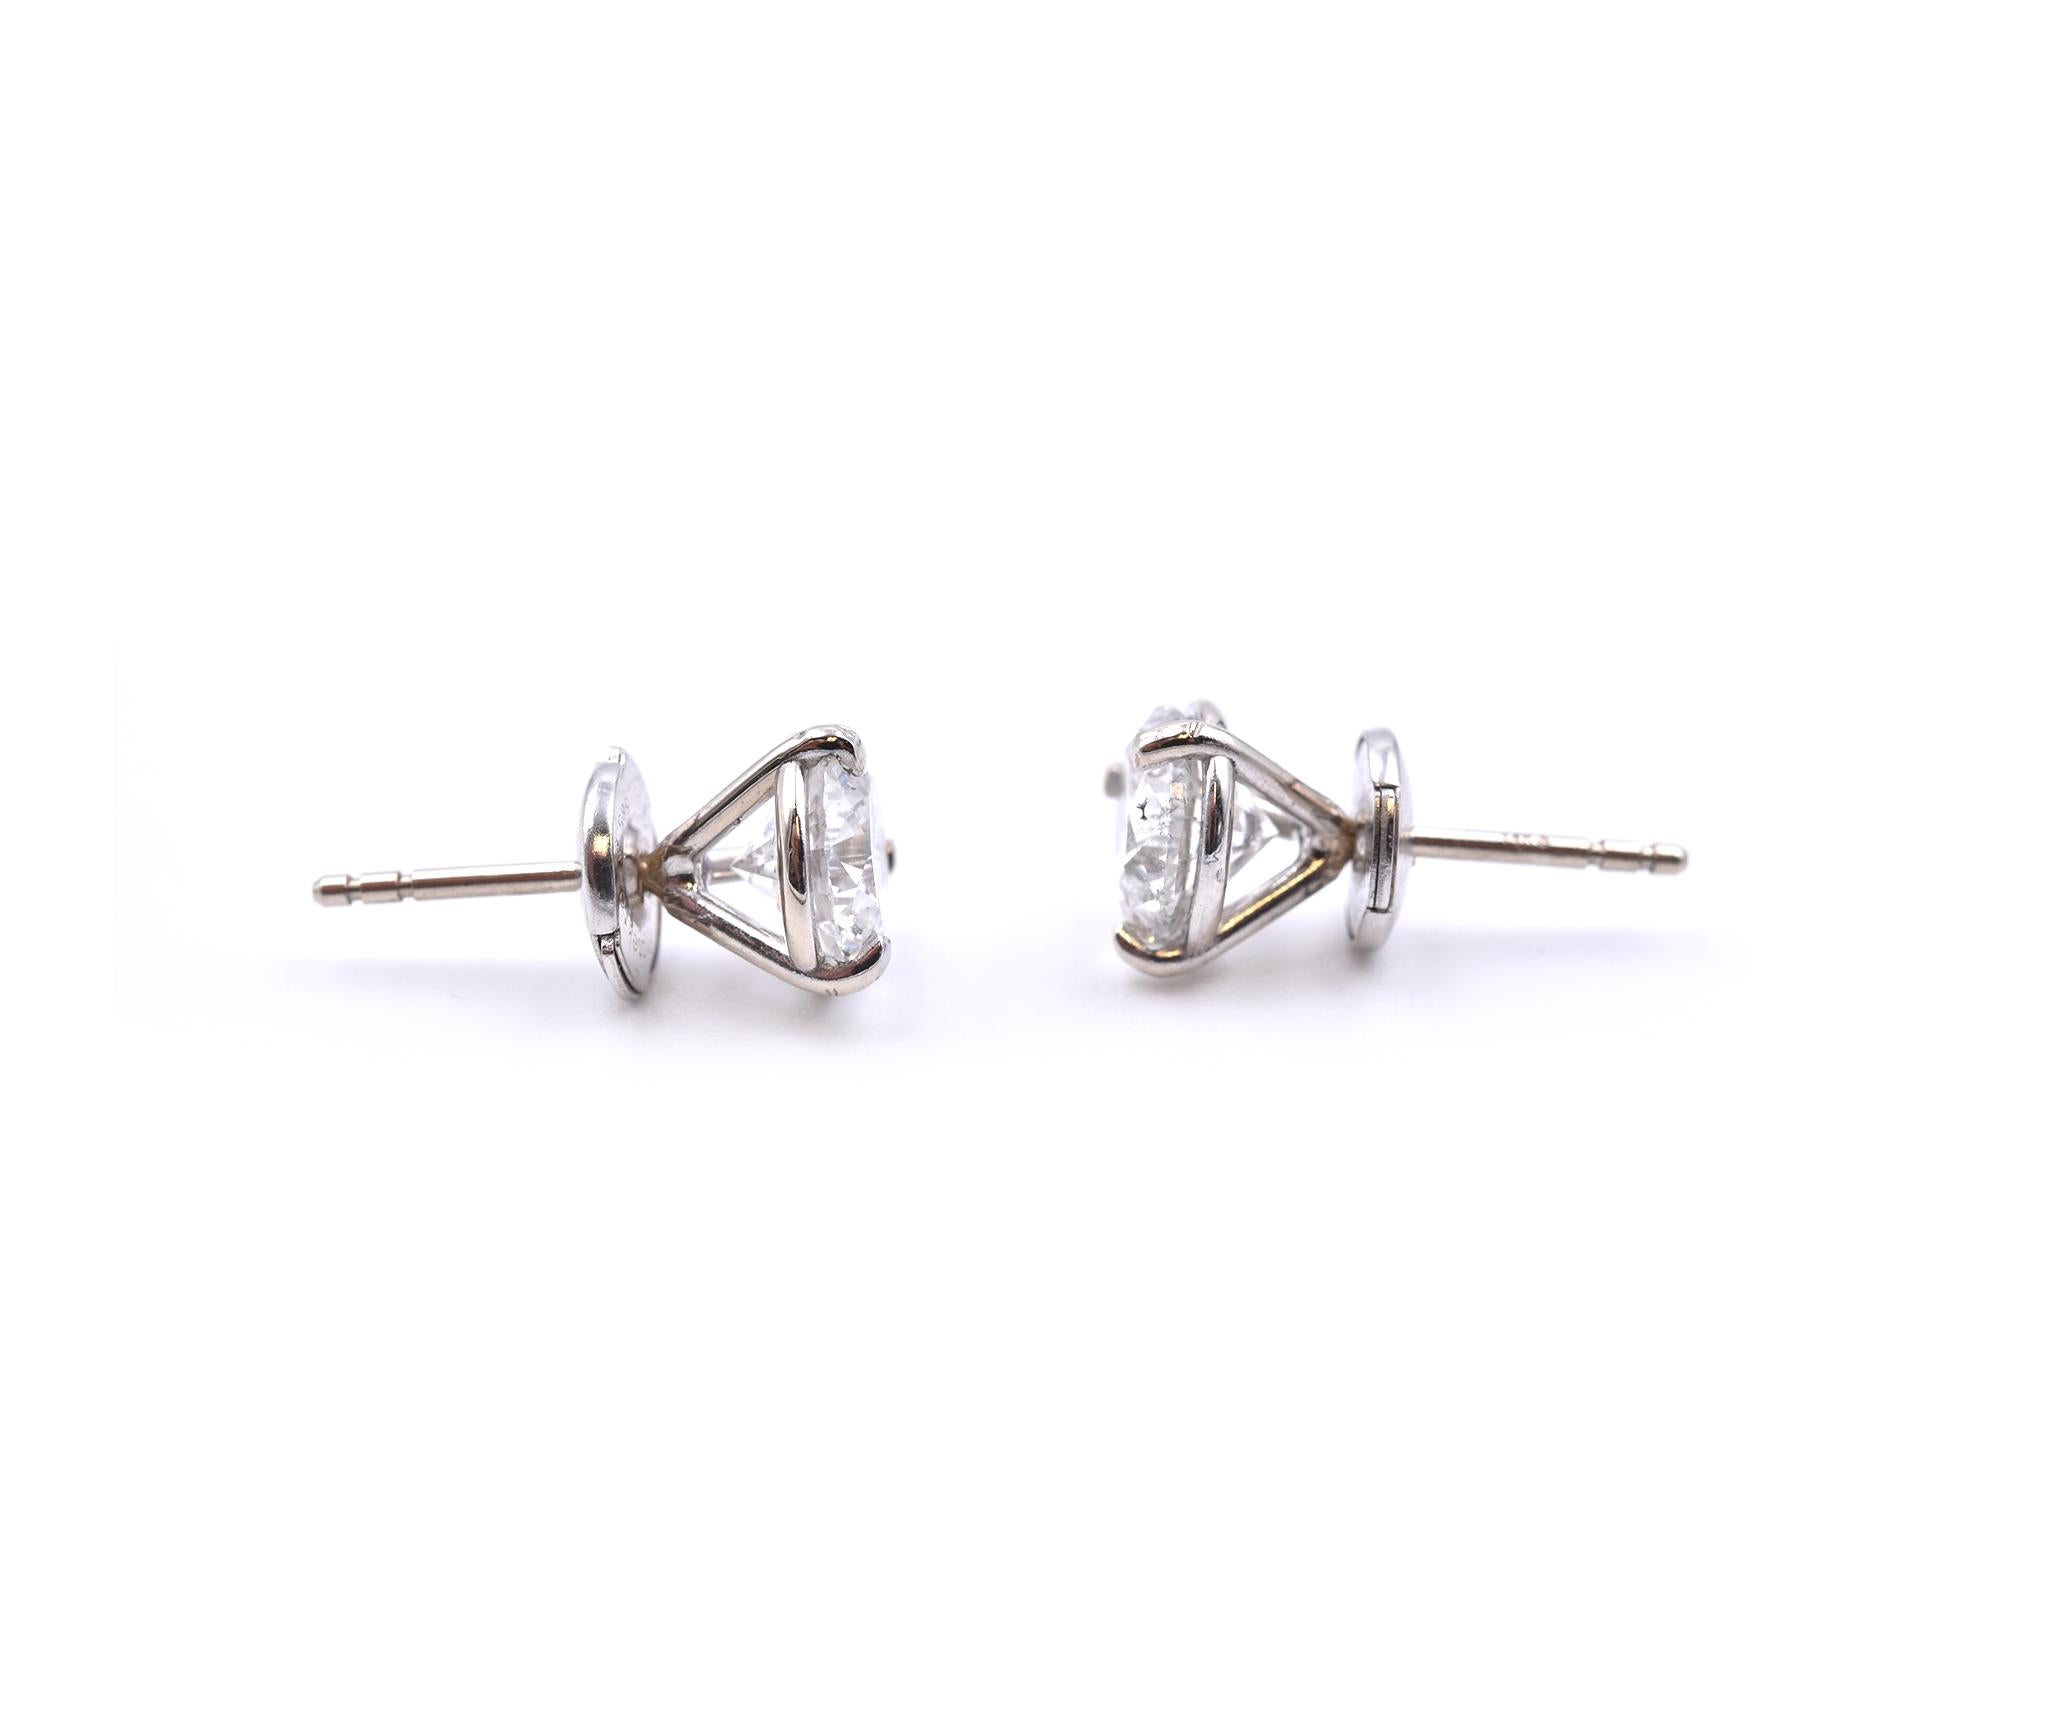 Material: 14k white gold
Diamond: 1 round brilliant cut = 1.04ct
Color: H
Clarity: SI2
Diamond: 1 round brilliant cut = 1.00ct
Color: H
Clarity: SI1
Dimensions: earrings measure approximately 7.6mm
Fastenings: post with la pousette backs
Weight: 